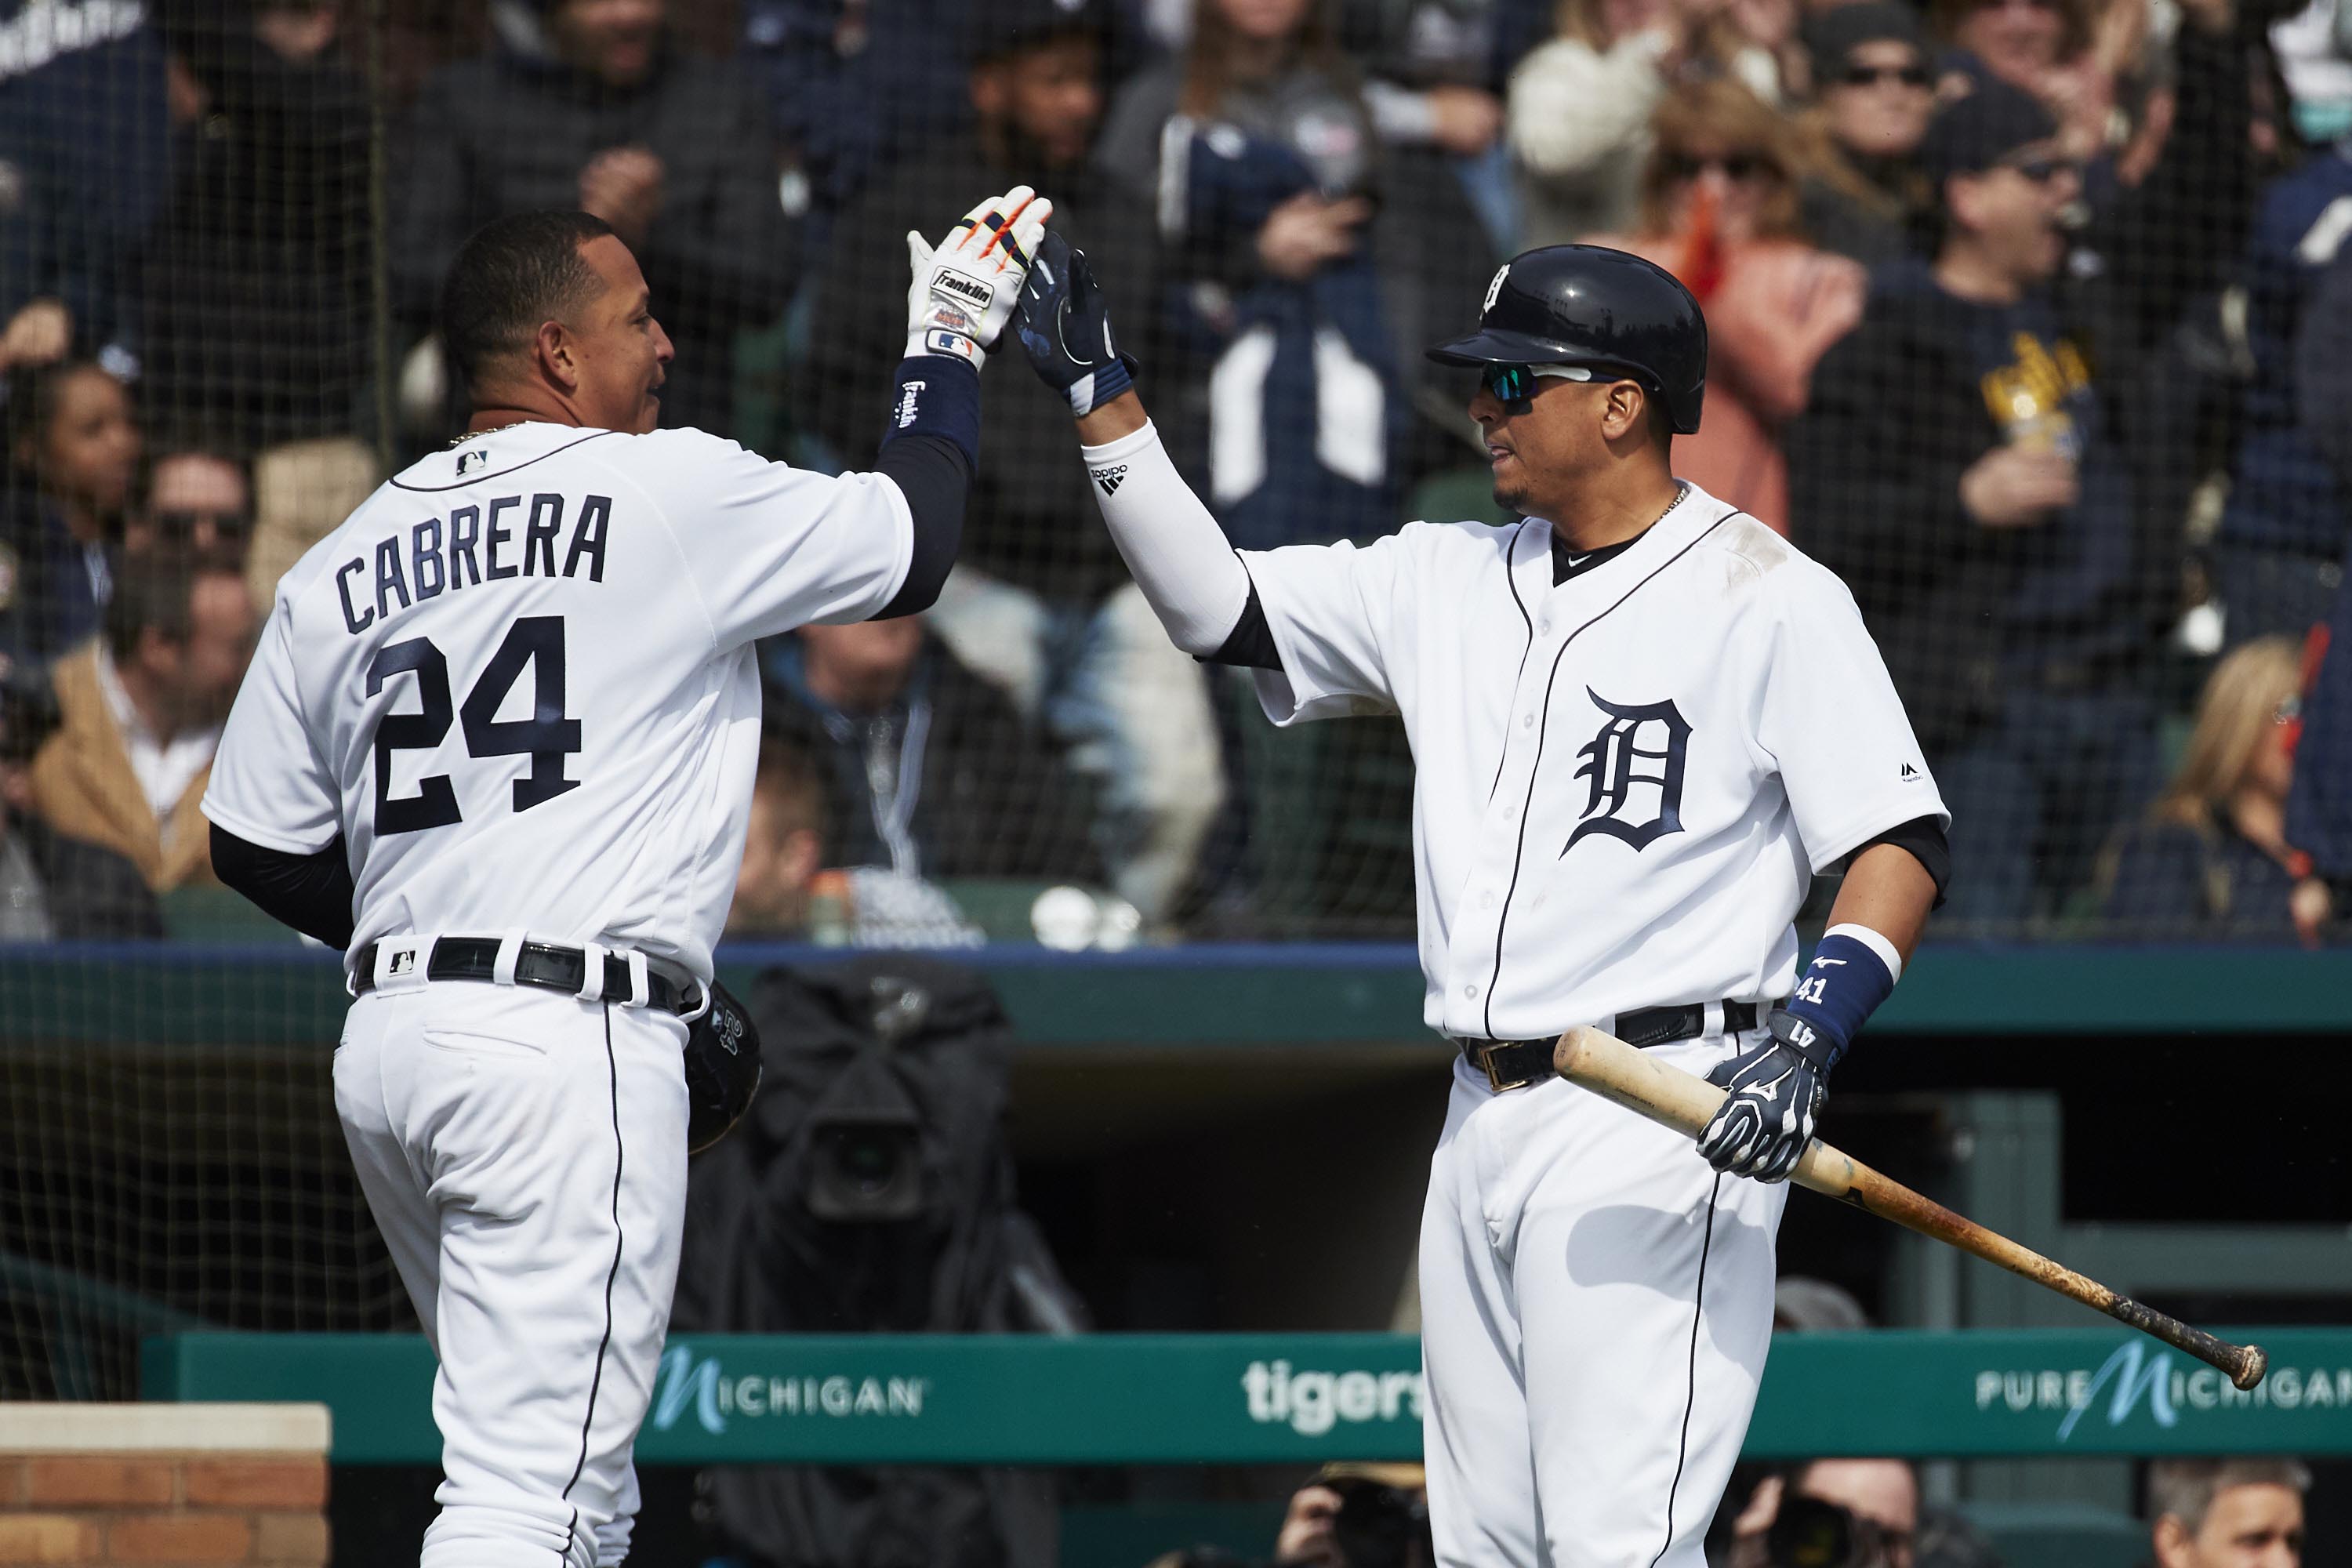 Mar 30, 2018; Detroit, MI, USA; Detroit Tigers first baseman Miguel Cabrera (24) receives congratulations from designated hitter Victor Martinez (41) after scoring in the seventh inning against the Pittsburgh Pirates at Comerica Park. Mandatory Credit: Rick Osentoski-USA TODAY Sports